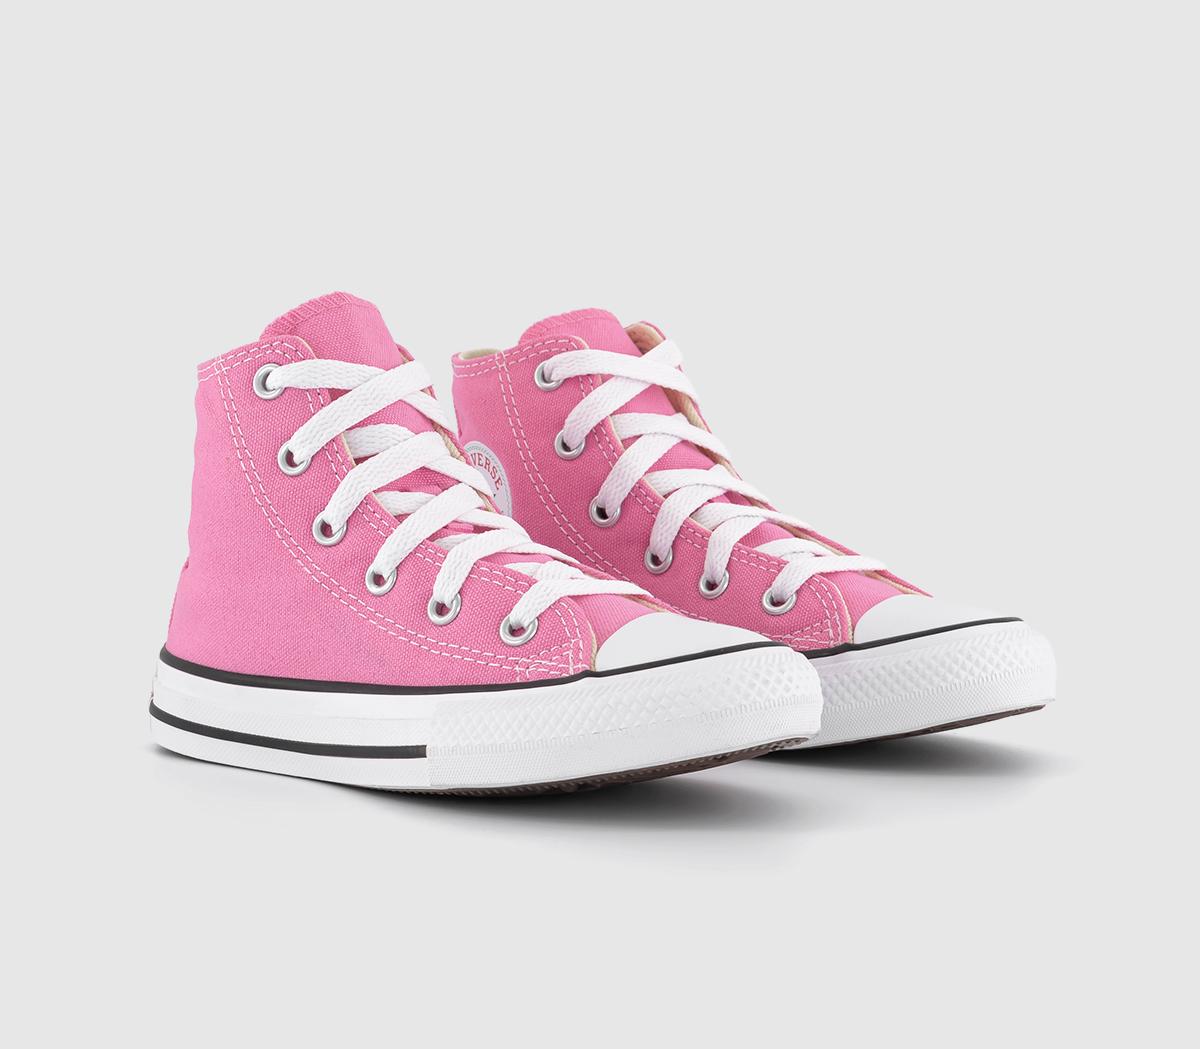 Converse Kids All Star Hi Mid Sizes Pink Canvas, 1 Youth